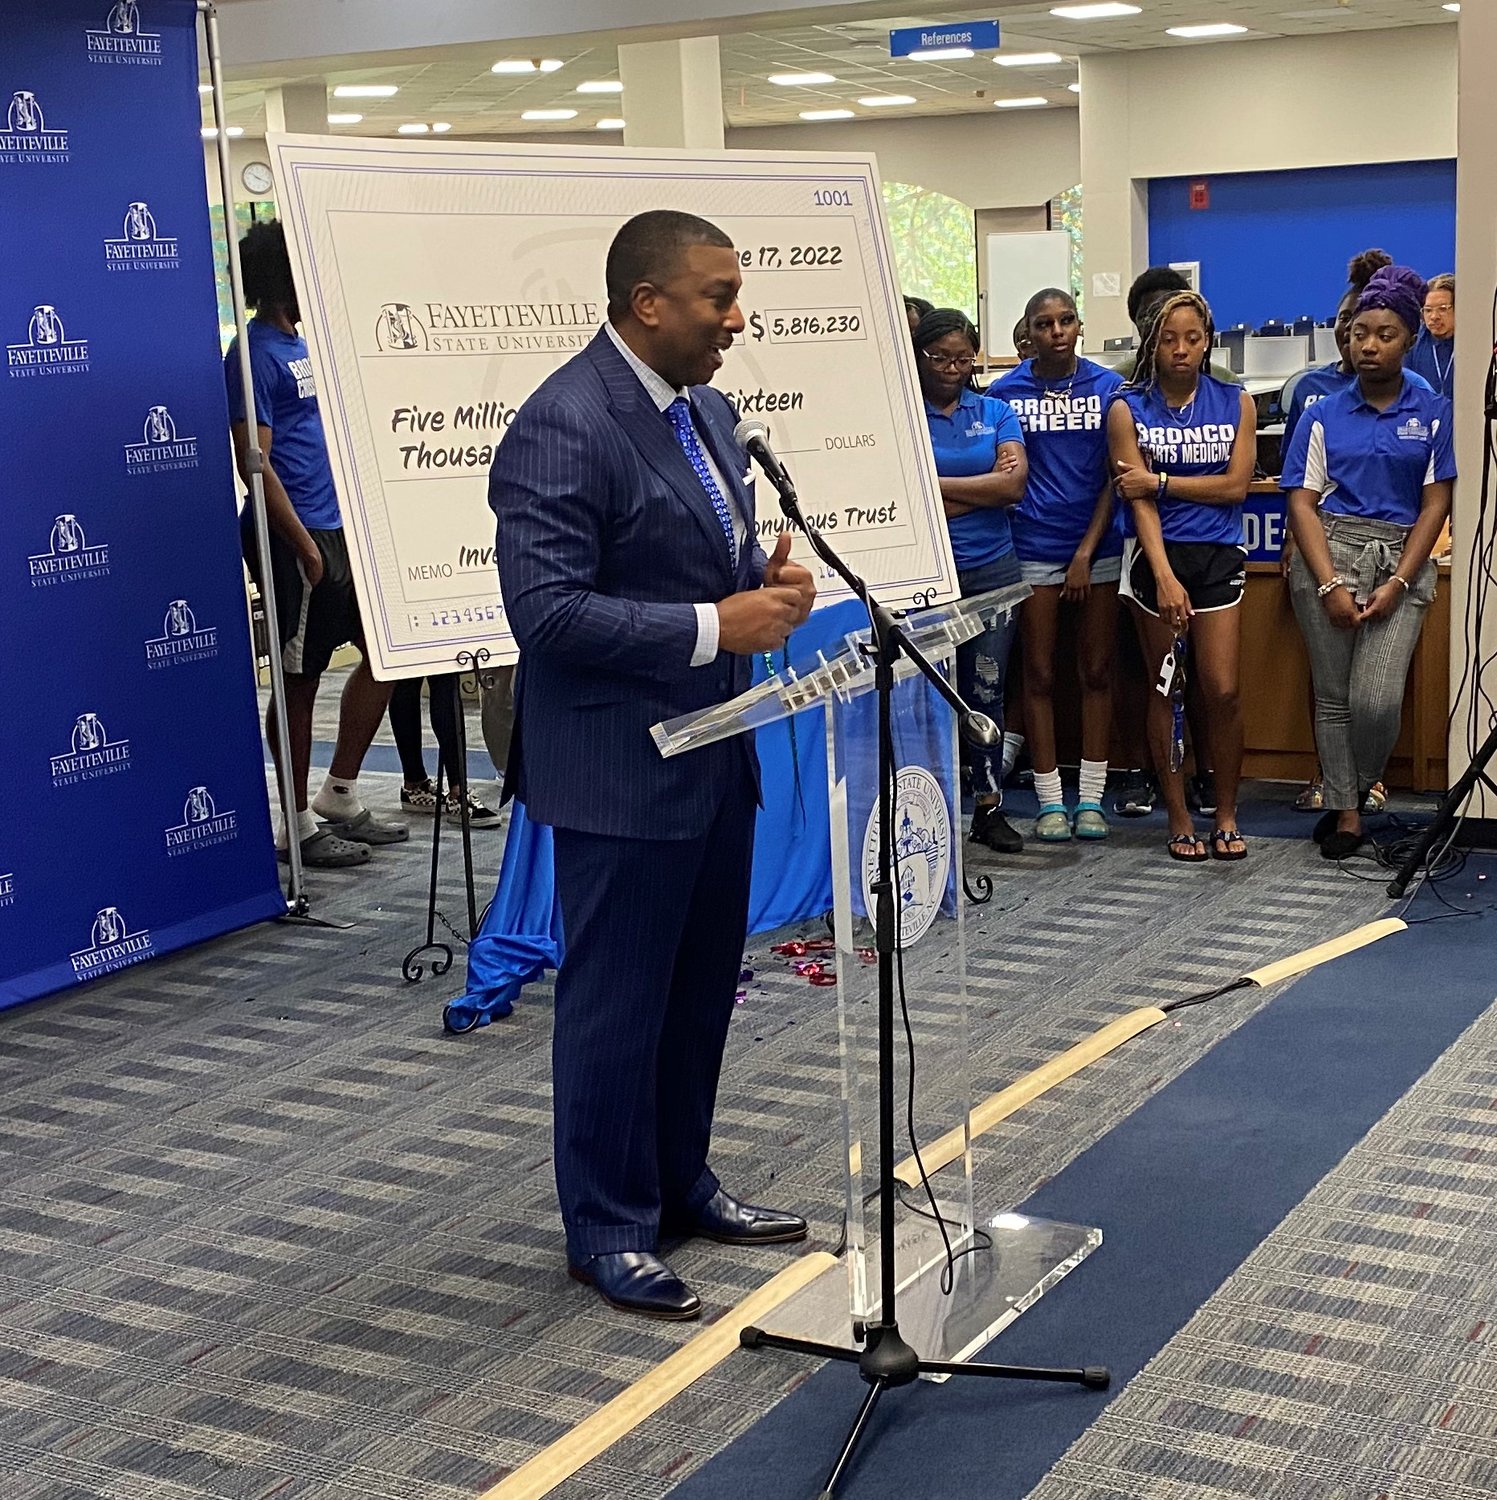 Fayetteville State University Chancellor Darrell Allison on June 17 announces a historic gift of $5.8 million to support key initiatives at the school. It is the largest single private donation in the school’s history.